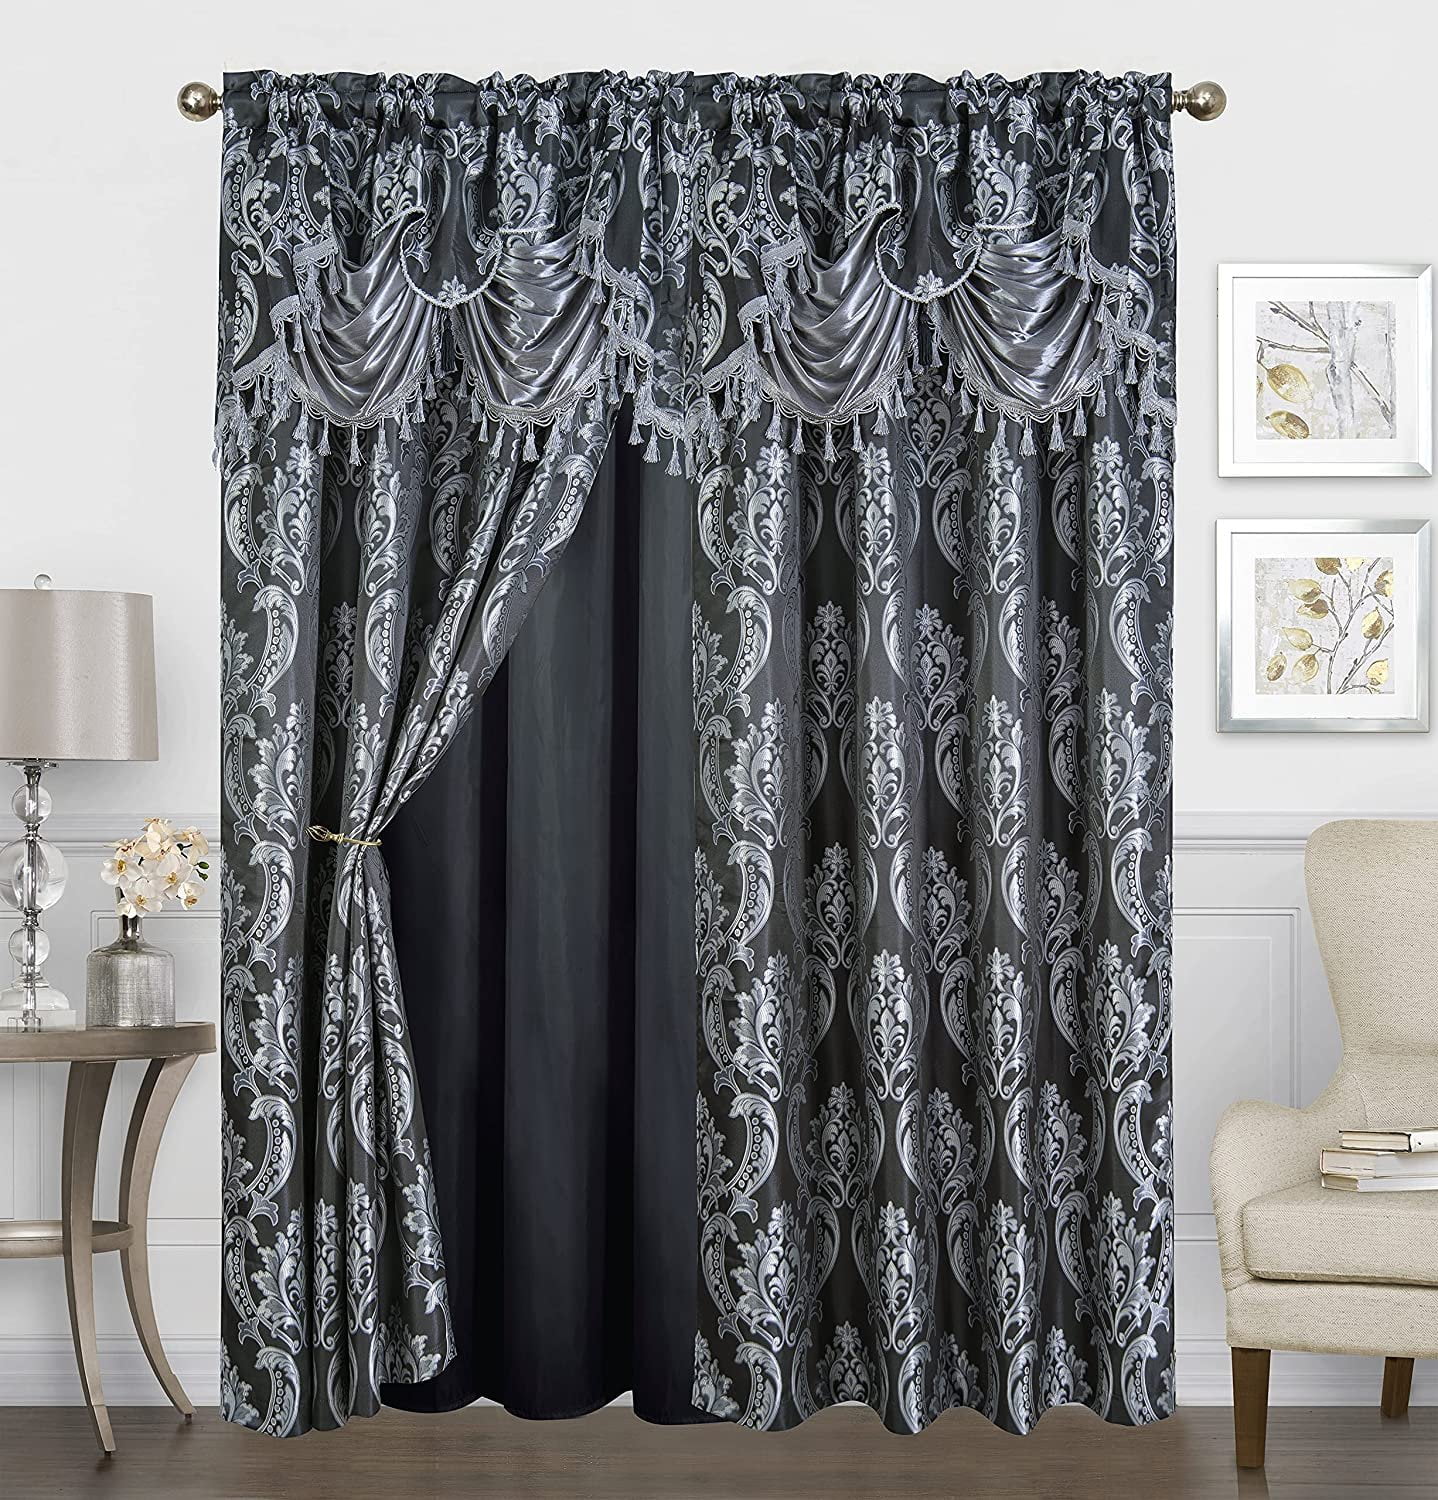 JACQUARD FLORAL DAMASK BROWN LINED PENCIL PLEAT CURTAINS 10 SIZES 